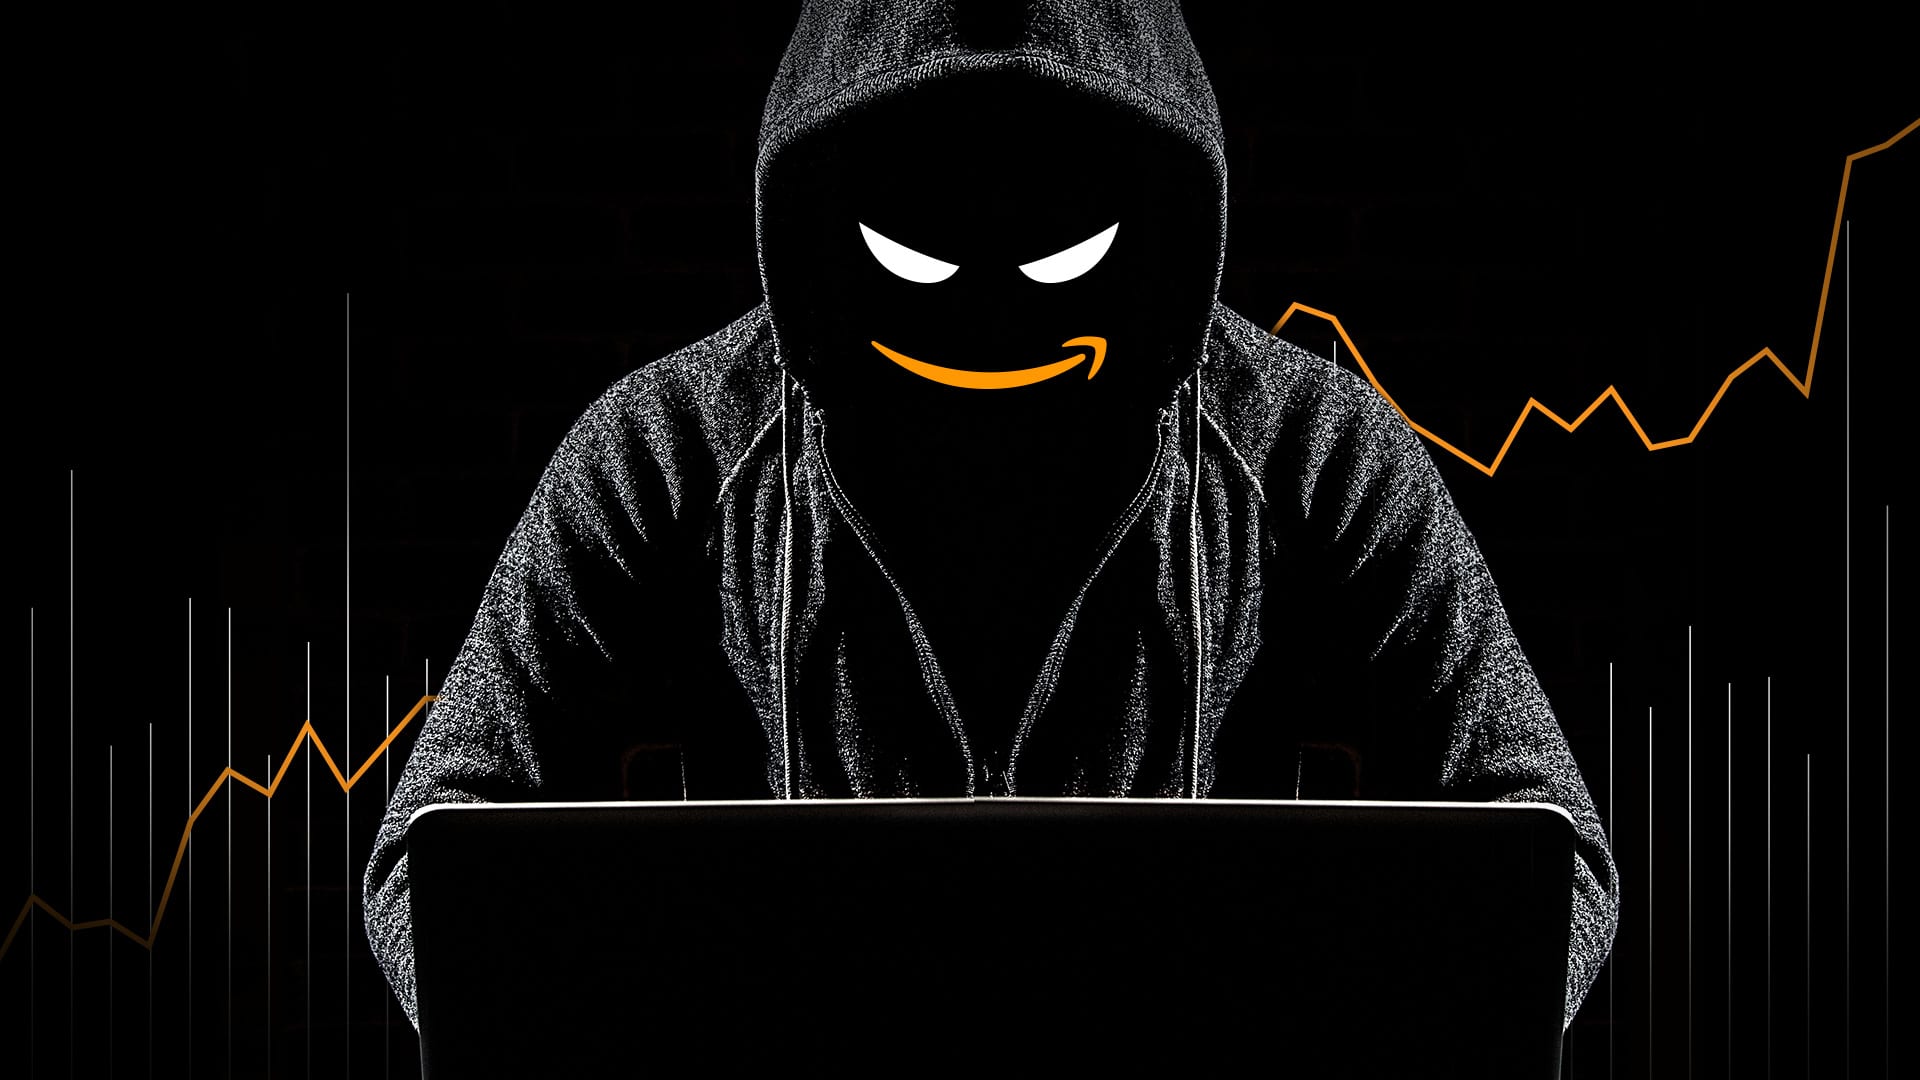 Amazon seller lost $400k after being targeted by 'virus of Amazon'